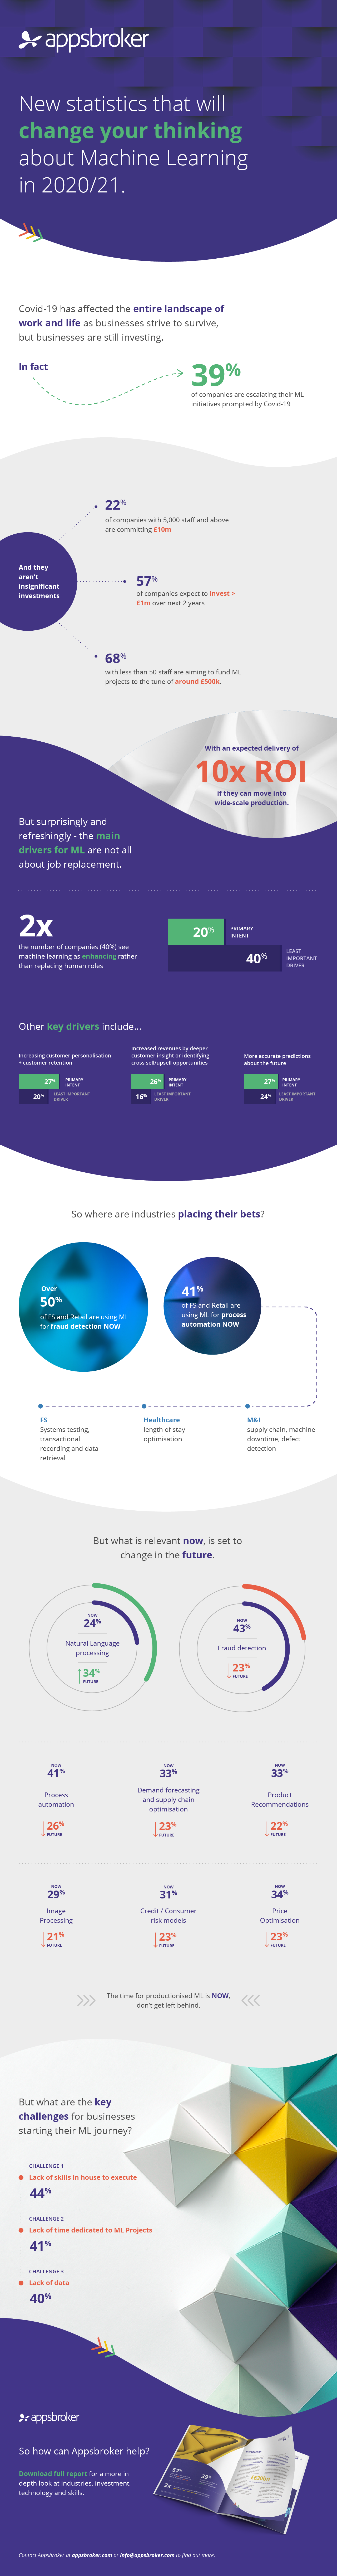 Machine Learning Report 2020 Infographic